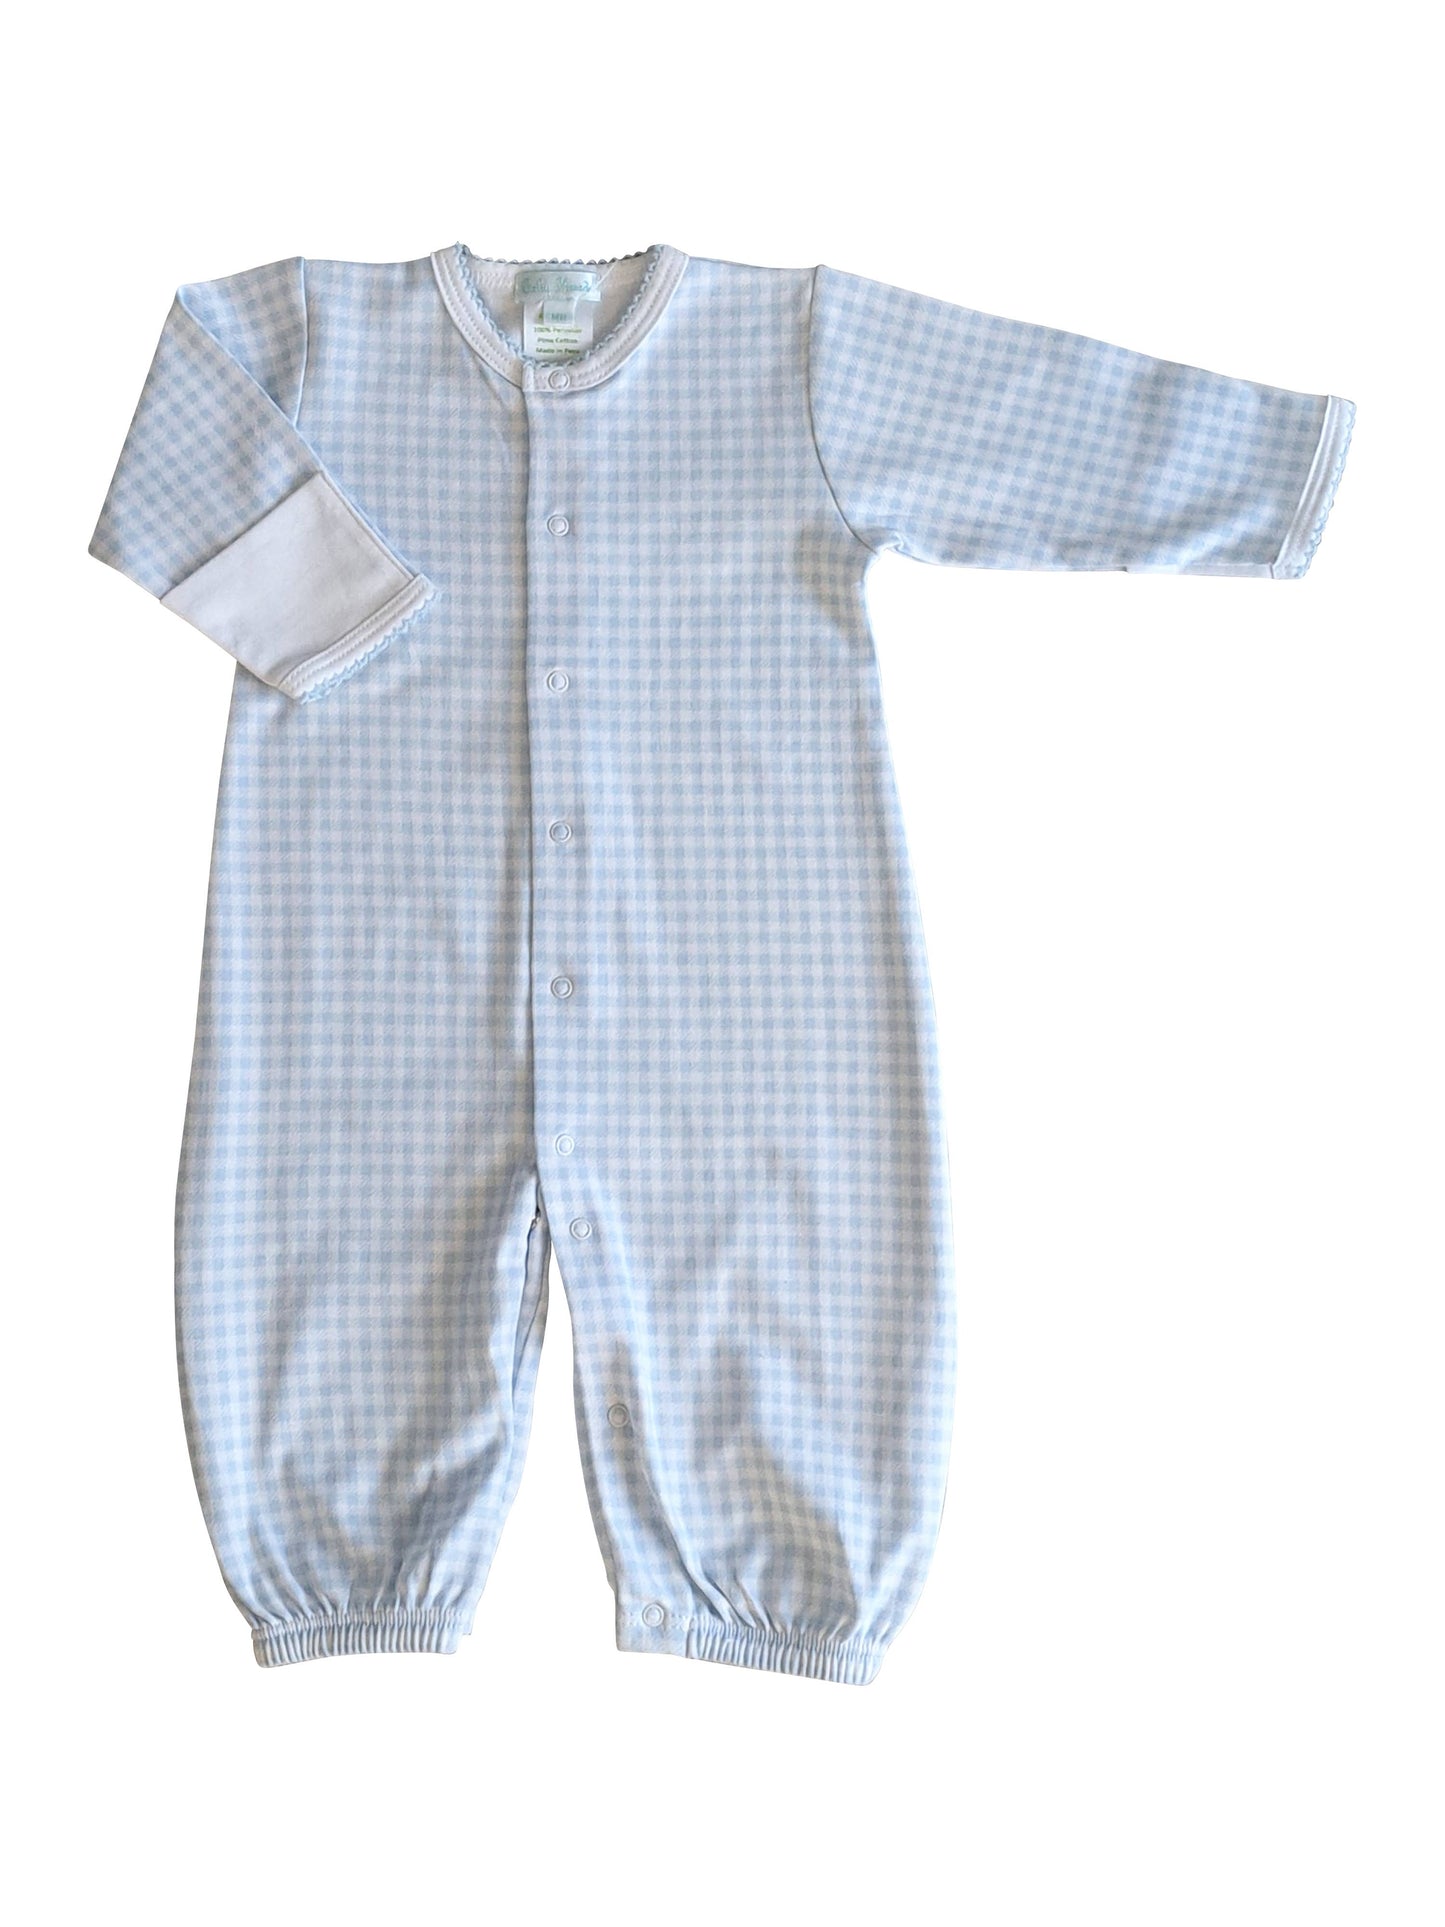 Pima Cotton Baby Take me Home converter gown